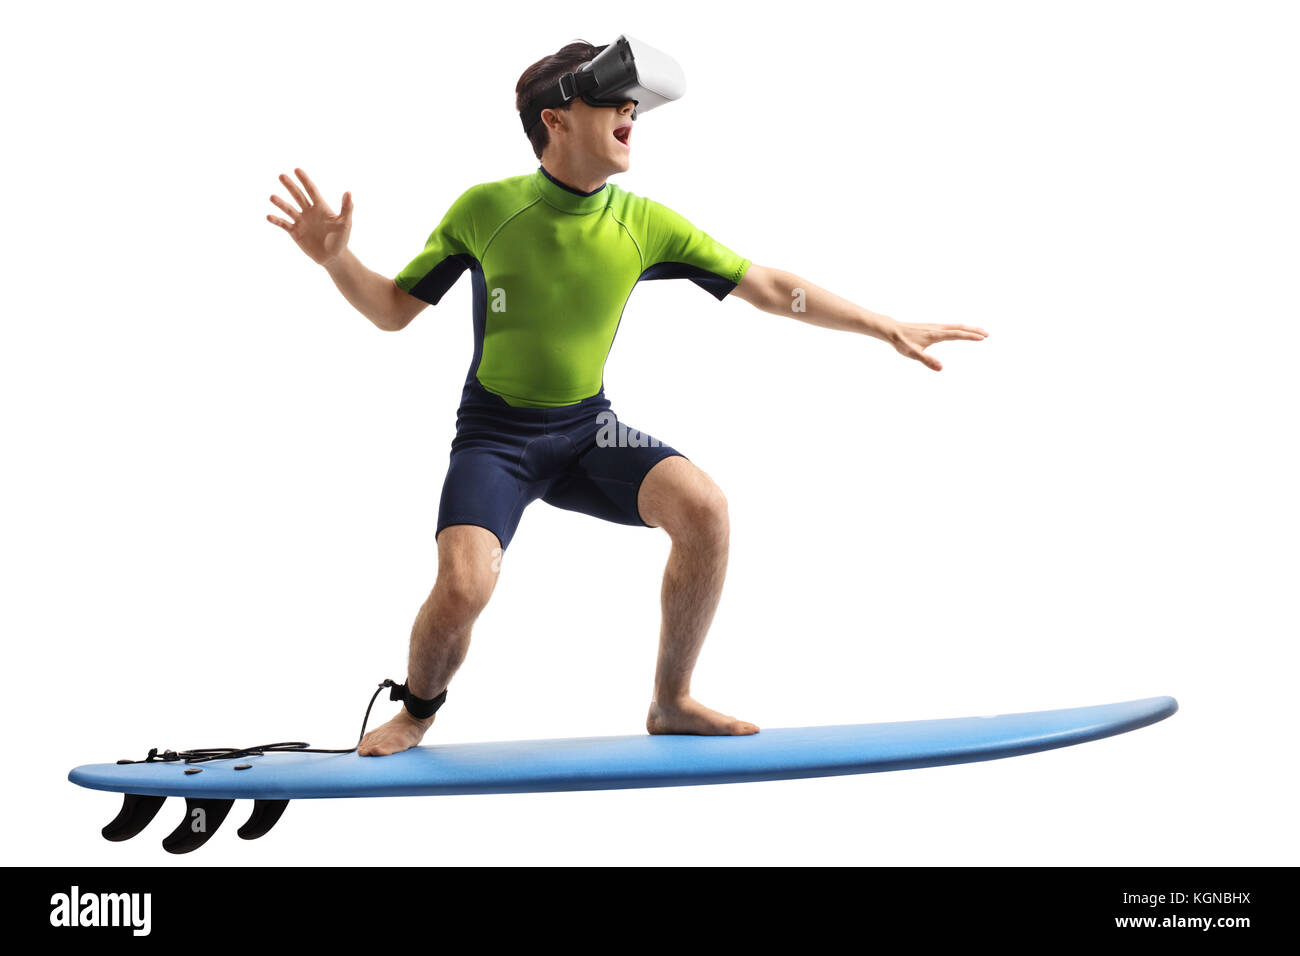 Teenage boy with a VR headset surfing isolated on white background Stock Photo